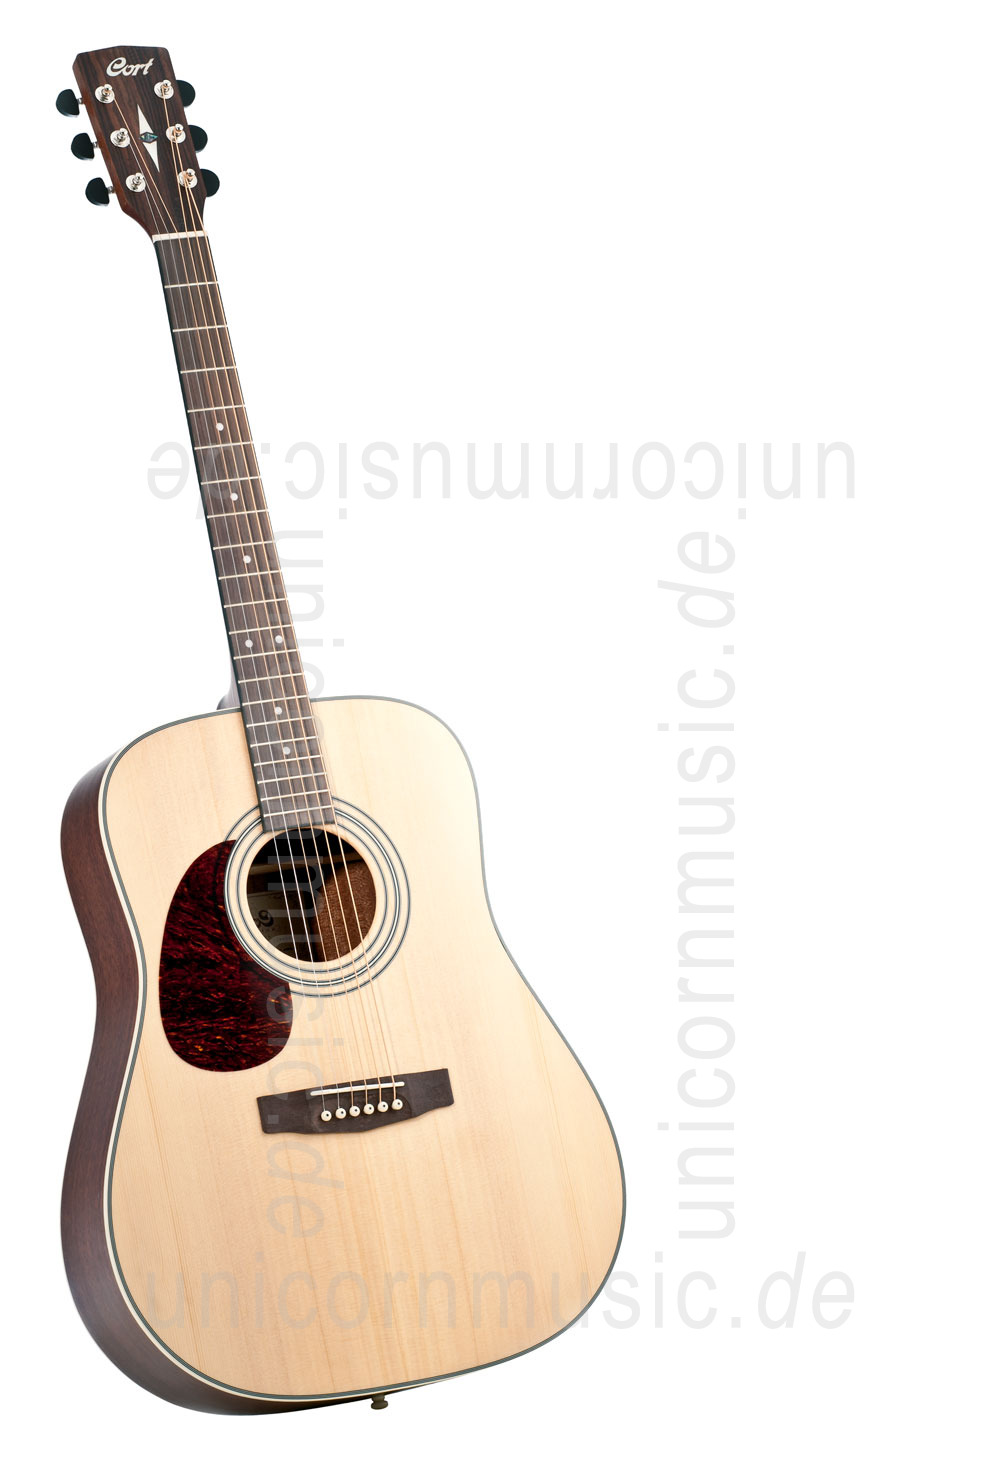 to article description / price Acoustic Guitar CORT EARTH 70 OP LH - Dreadnought - solid spruce top - left hand